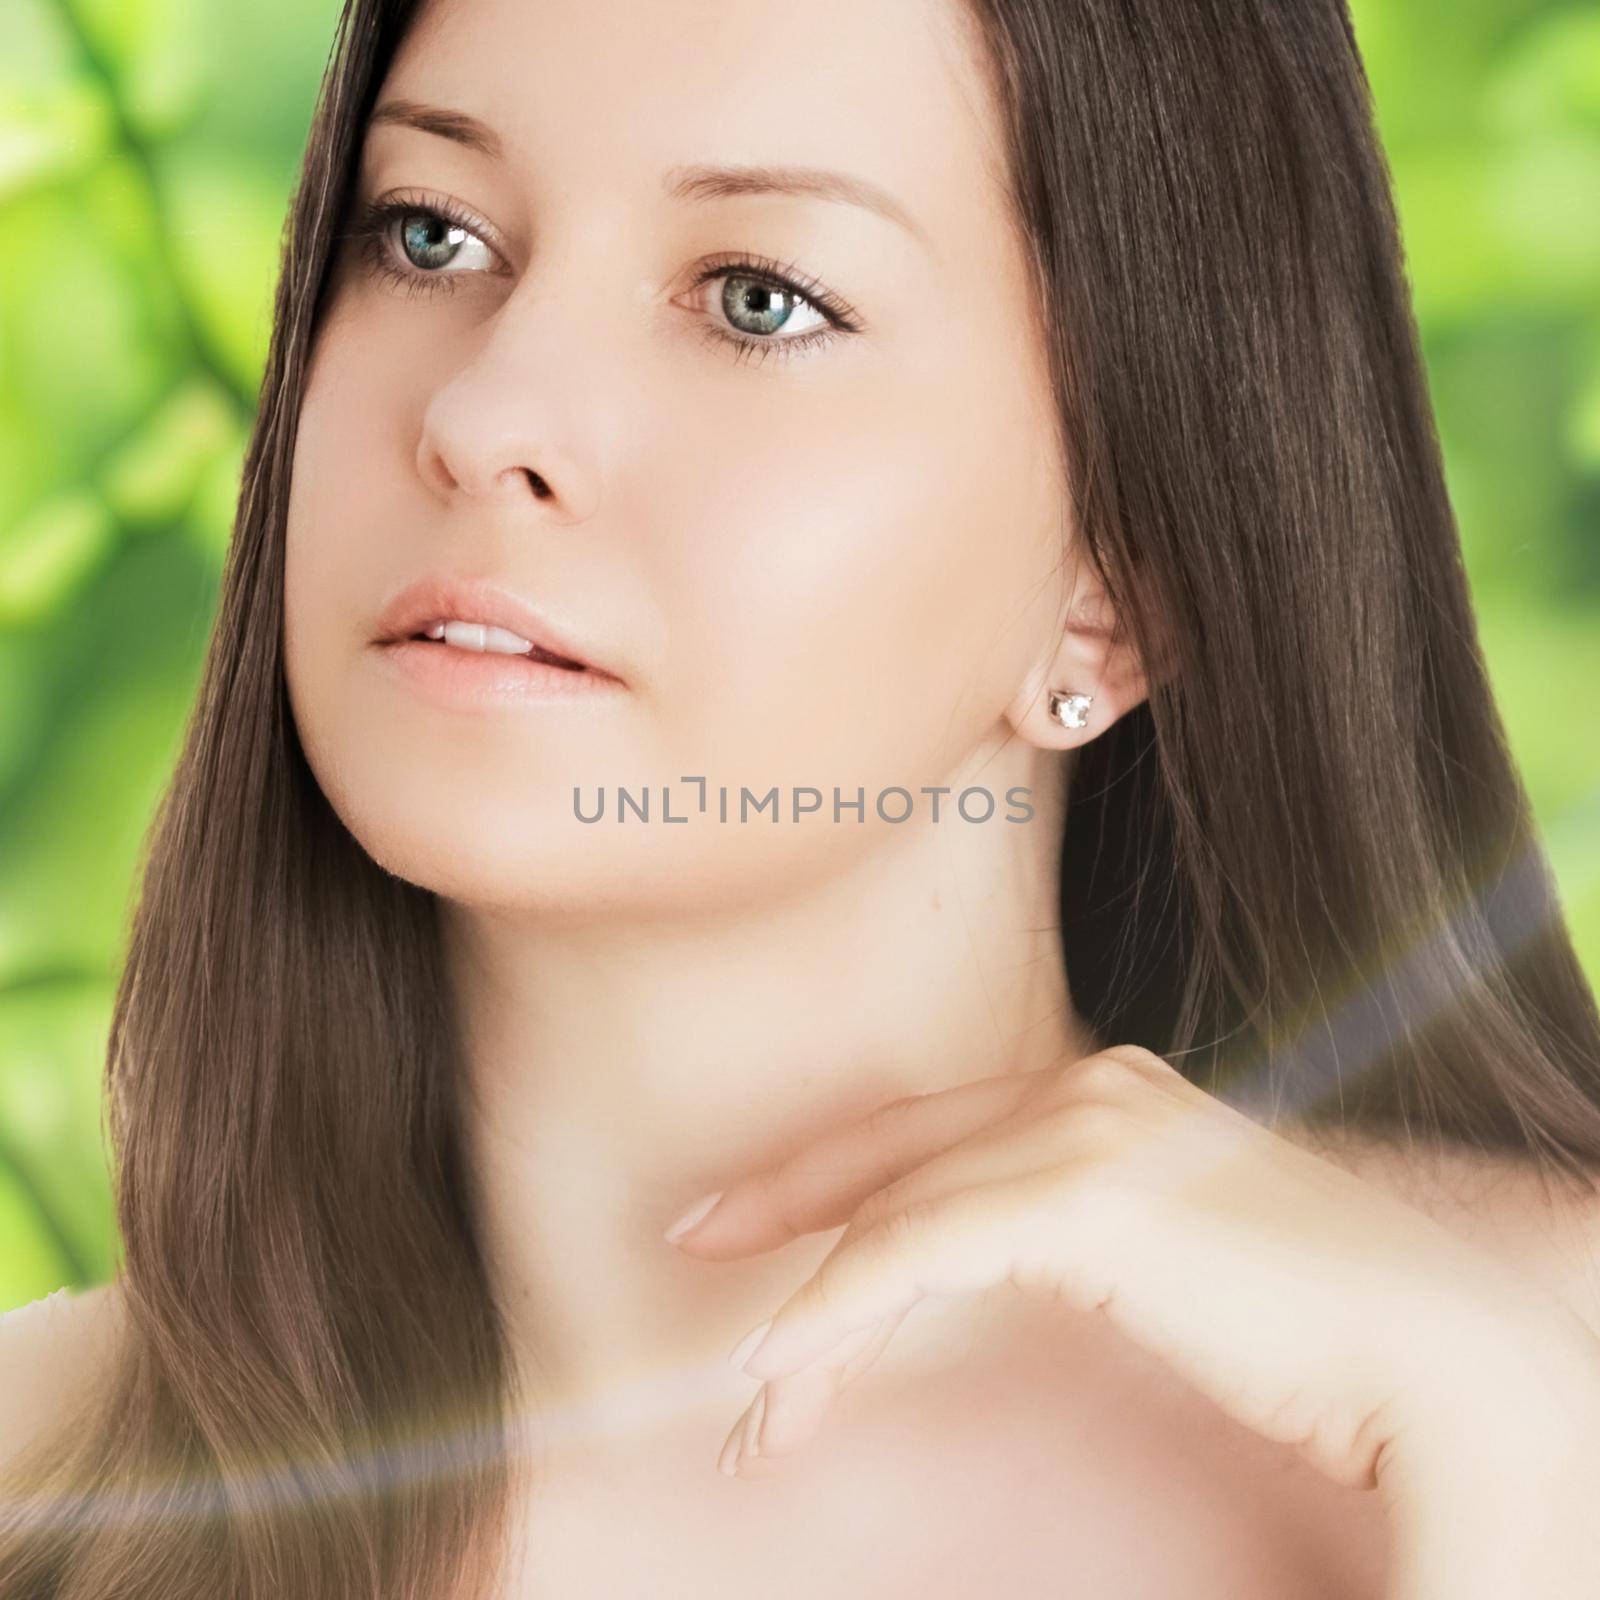 Beauty portrait of young woman for natural skincare and cosmetic brand, spring nature on background as wellness, health and organic beauty concept.